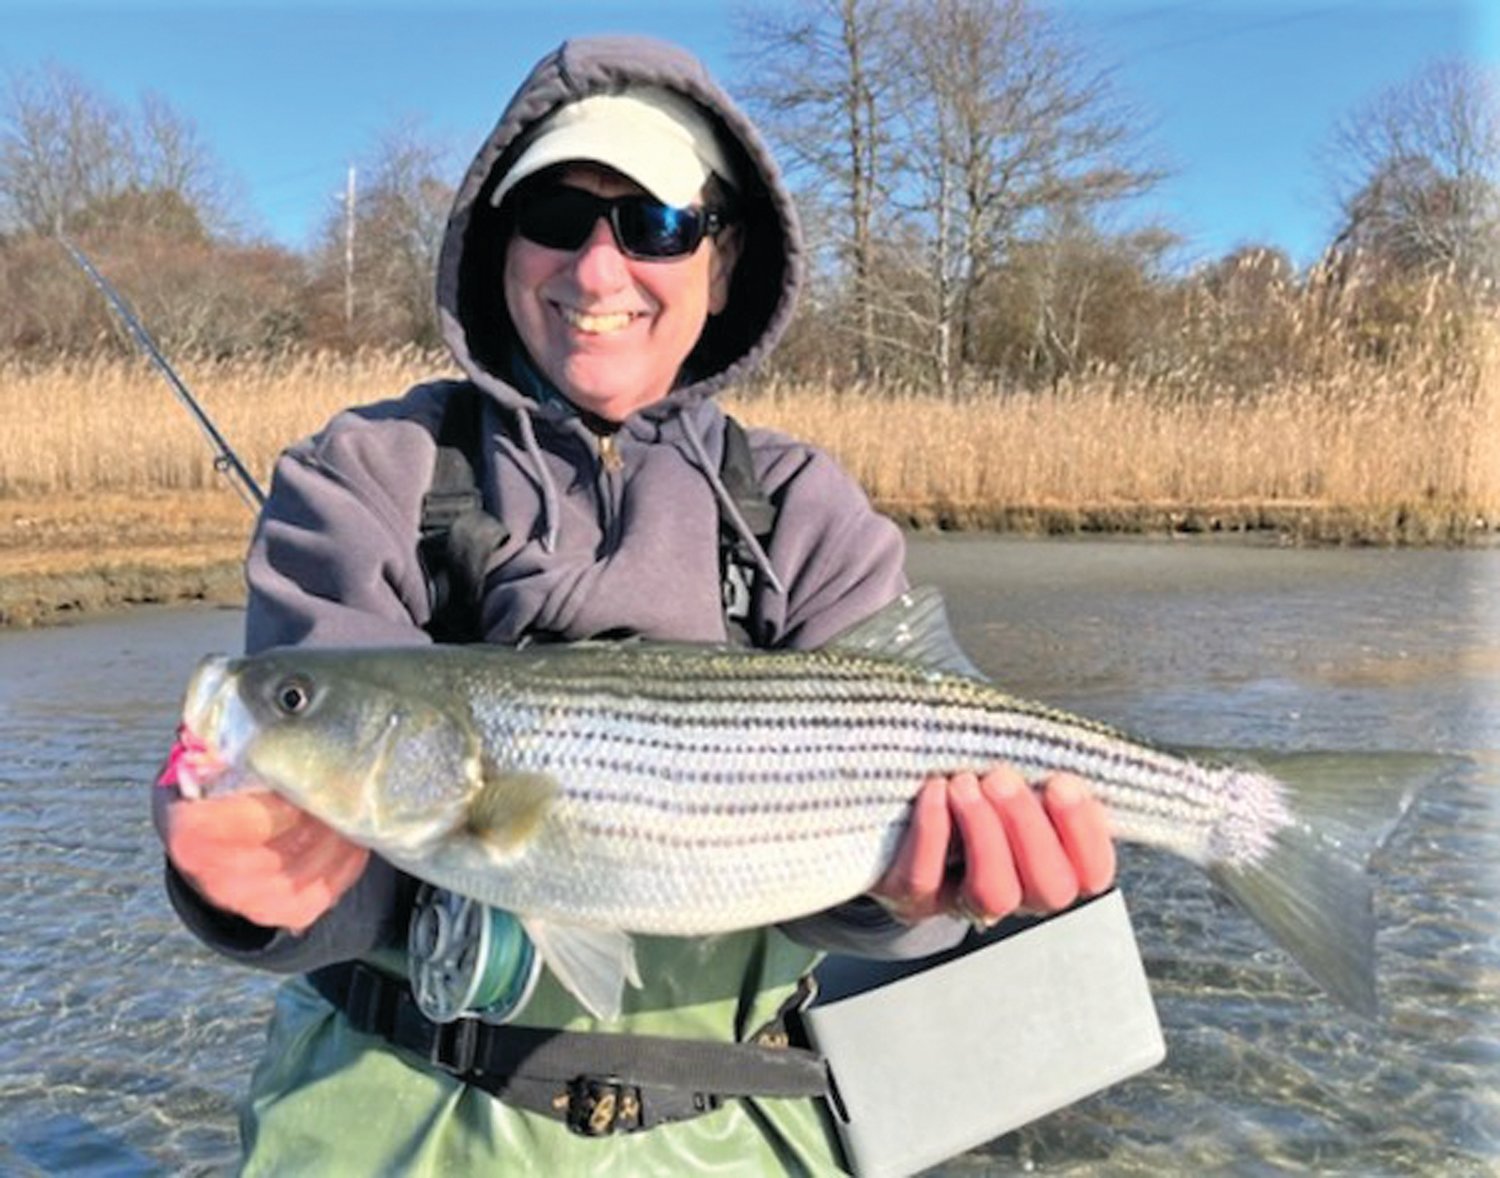 STRIPED BASS: Capt. Dave Monti with a plump striped bass caught in Narrow River, Narragansett at the end of last week with fishing guide/instructor Ed Lombardo. (Submitted photo)